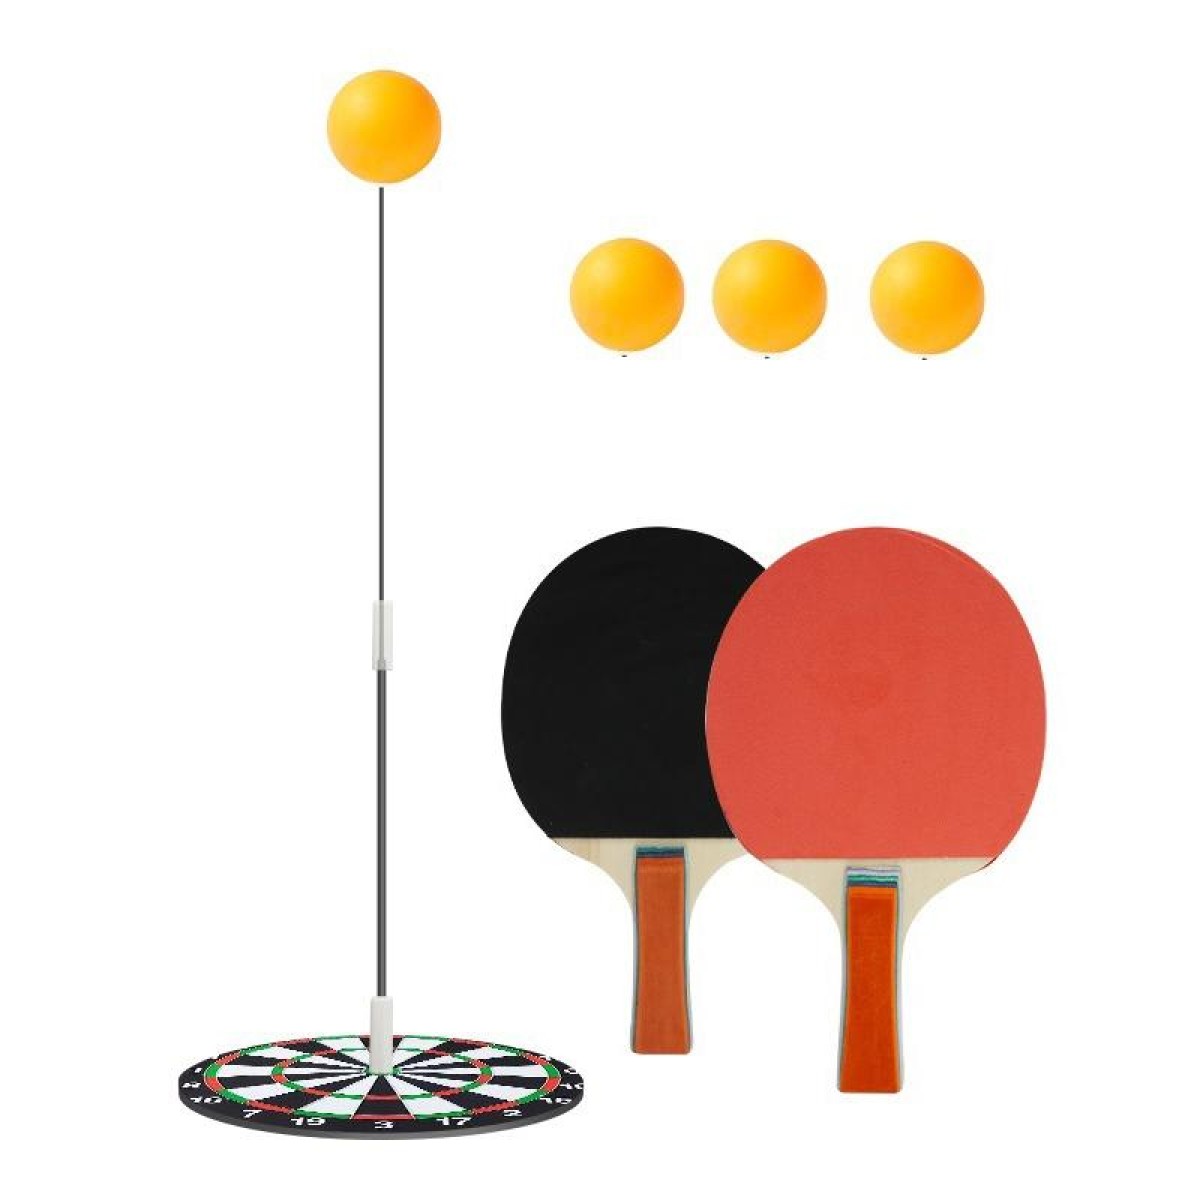 Table Tennis Training Equipment Household Childrens Sparring Coaching Base With Wood Bats, Specs: 4 Balls+1 Pole